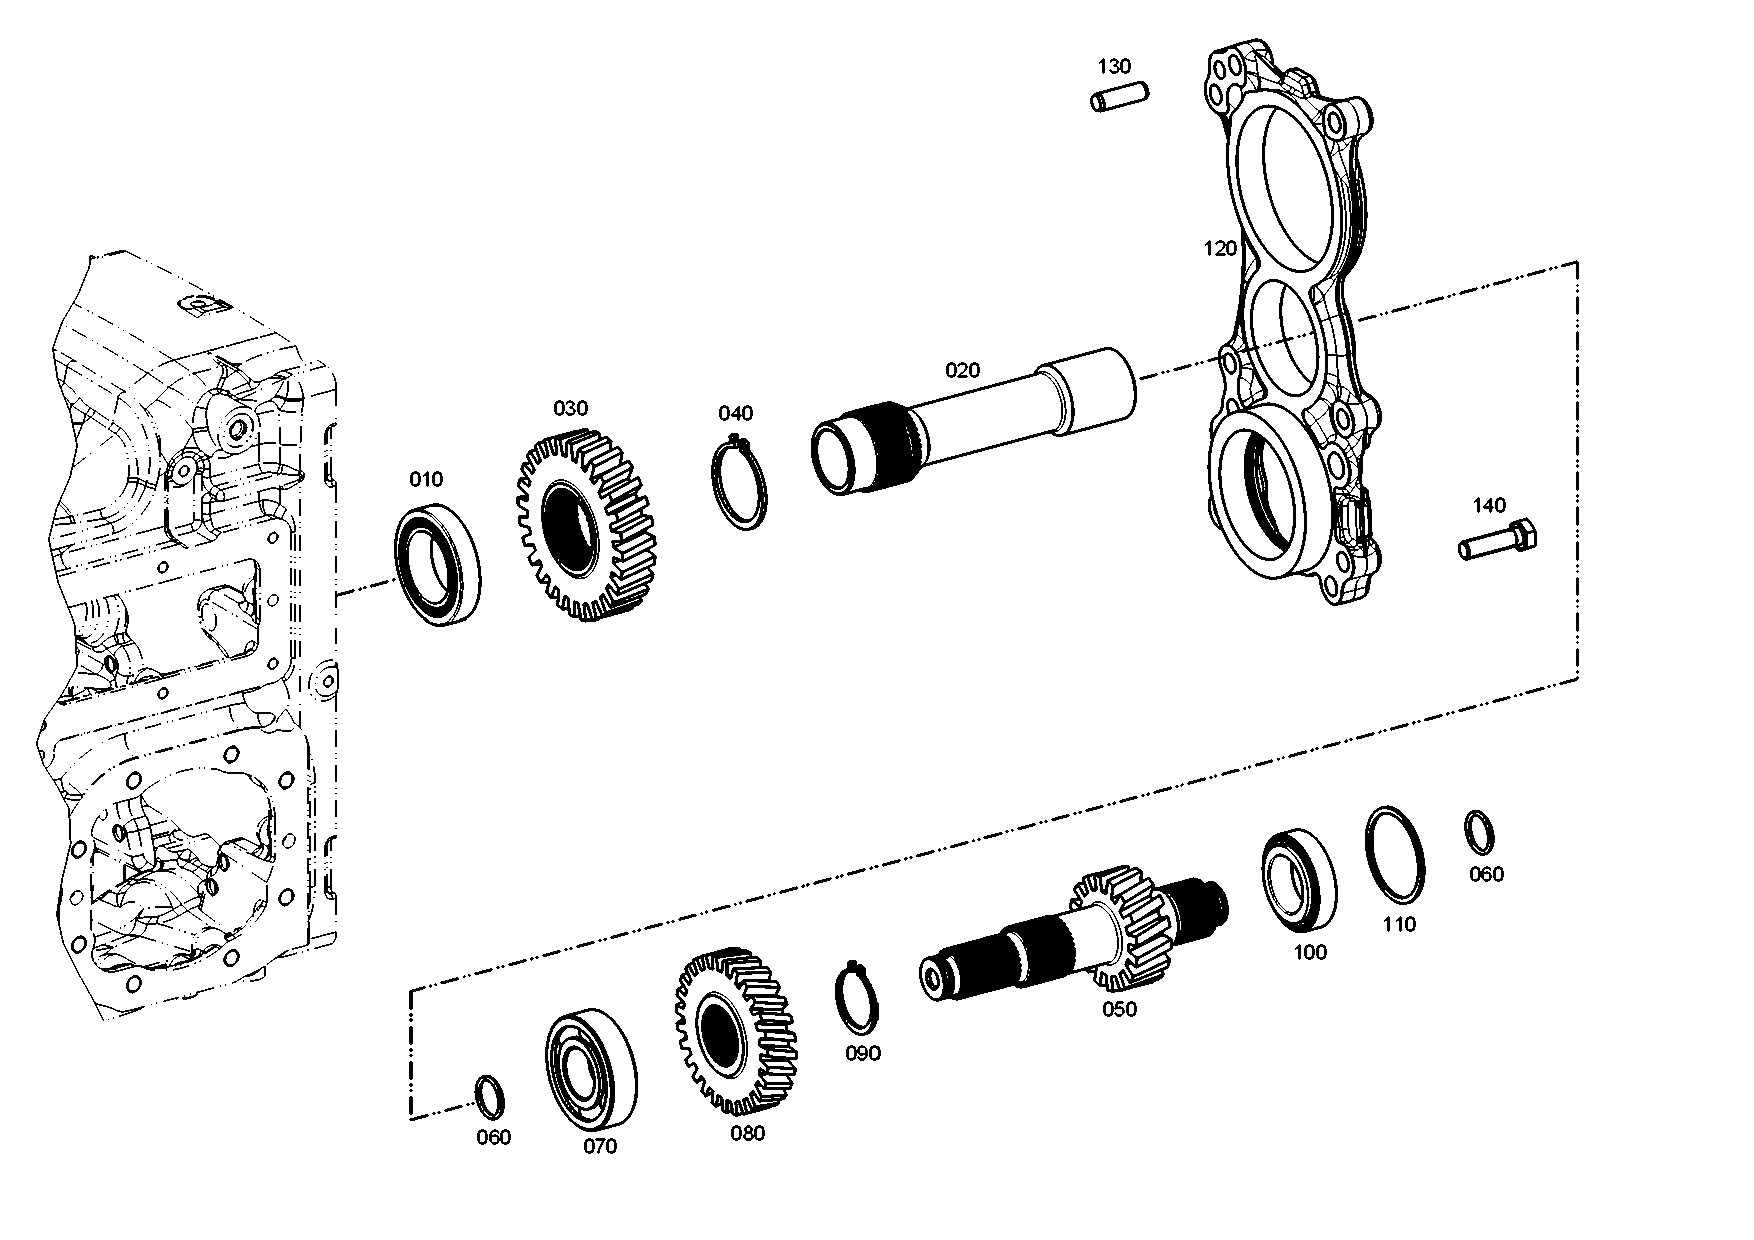 drawing for DAF 100080 - RETAINING RING (figure 1)